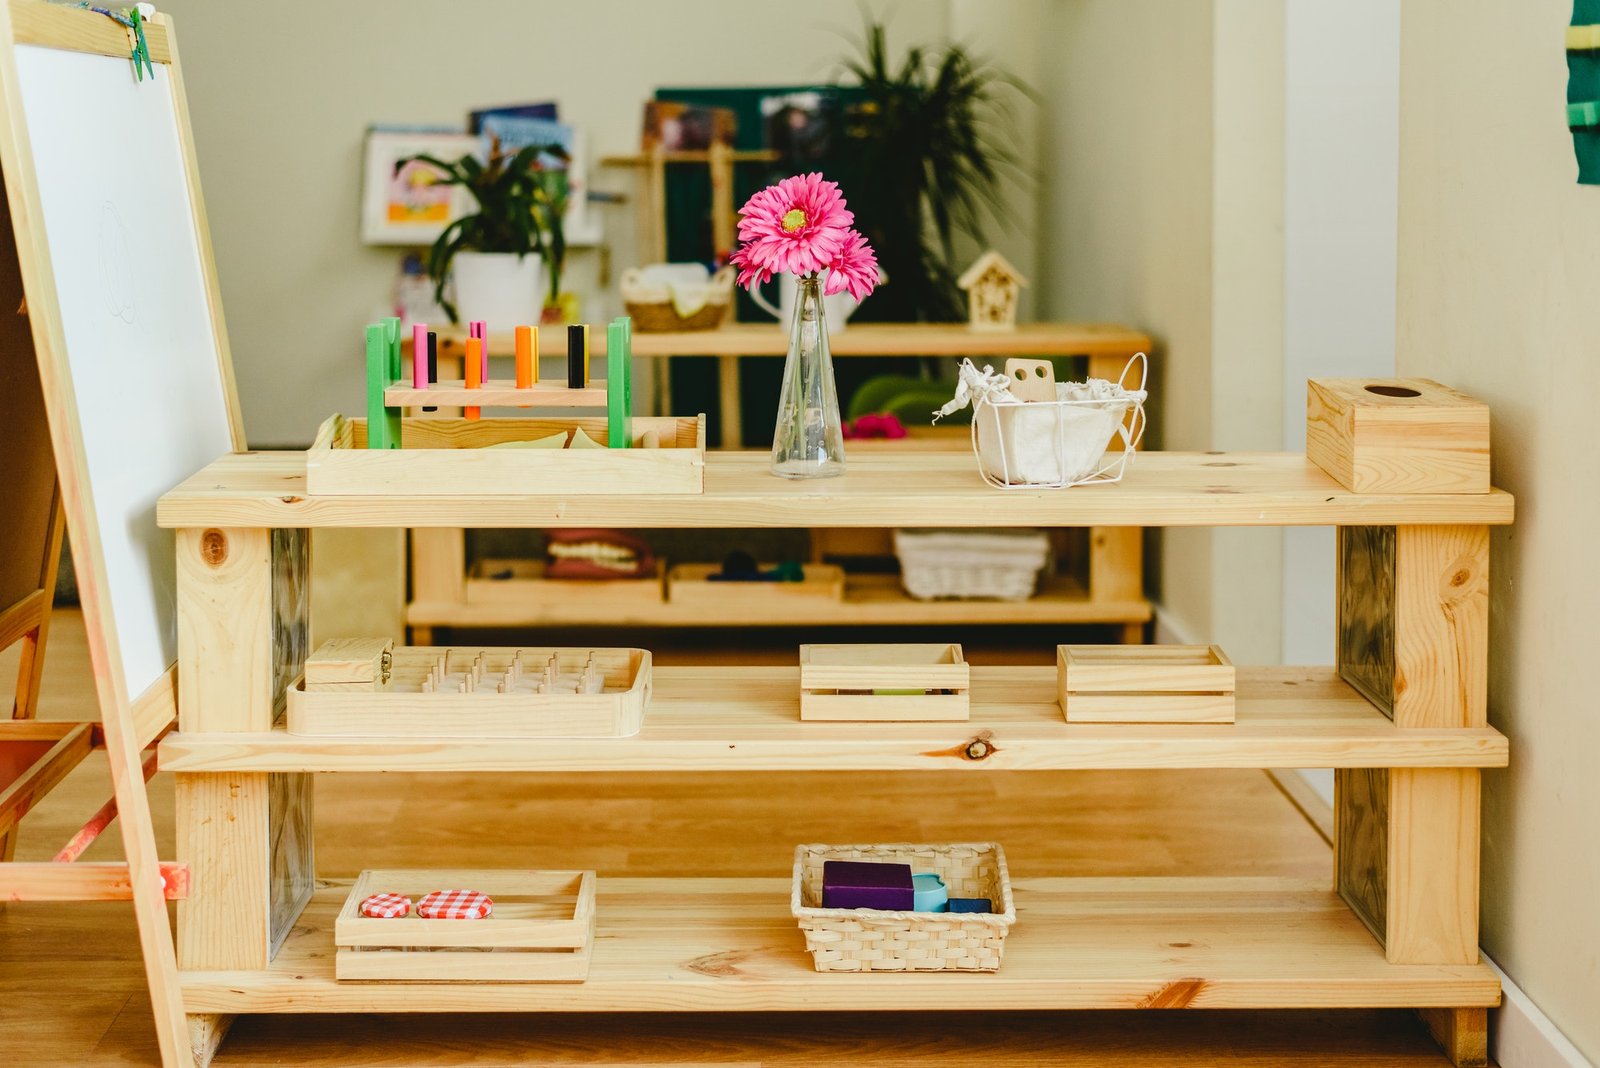  Montessori Classroom Layout Shelving in a classroom with montessori material